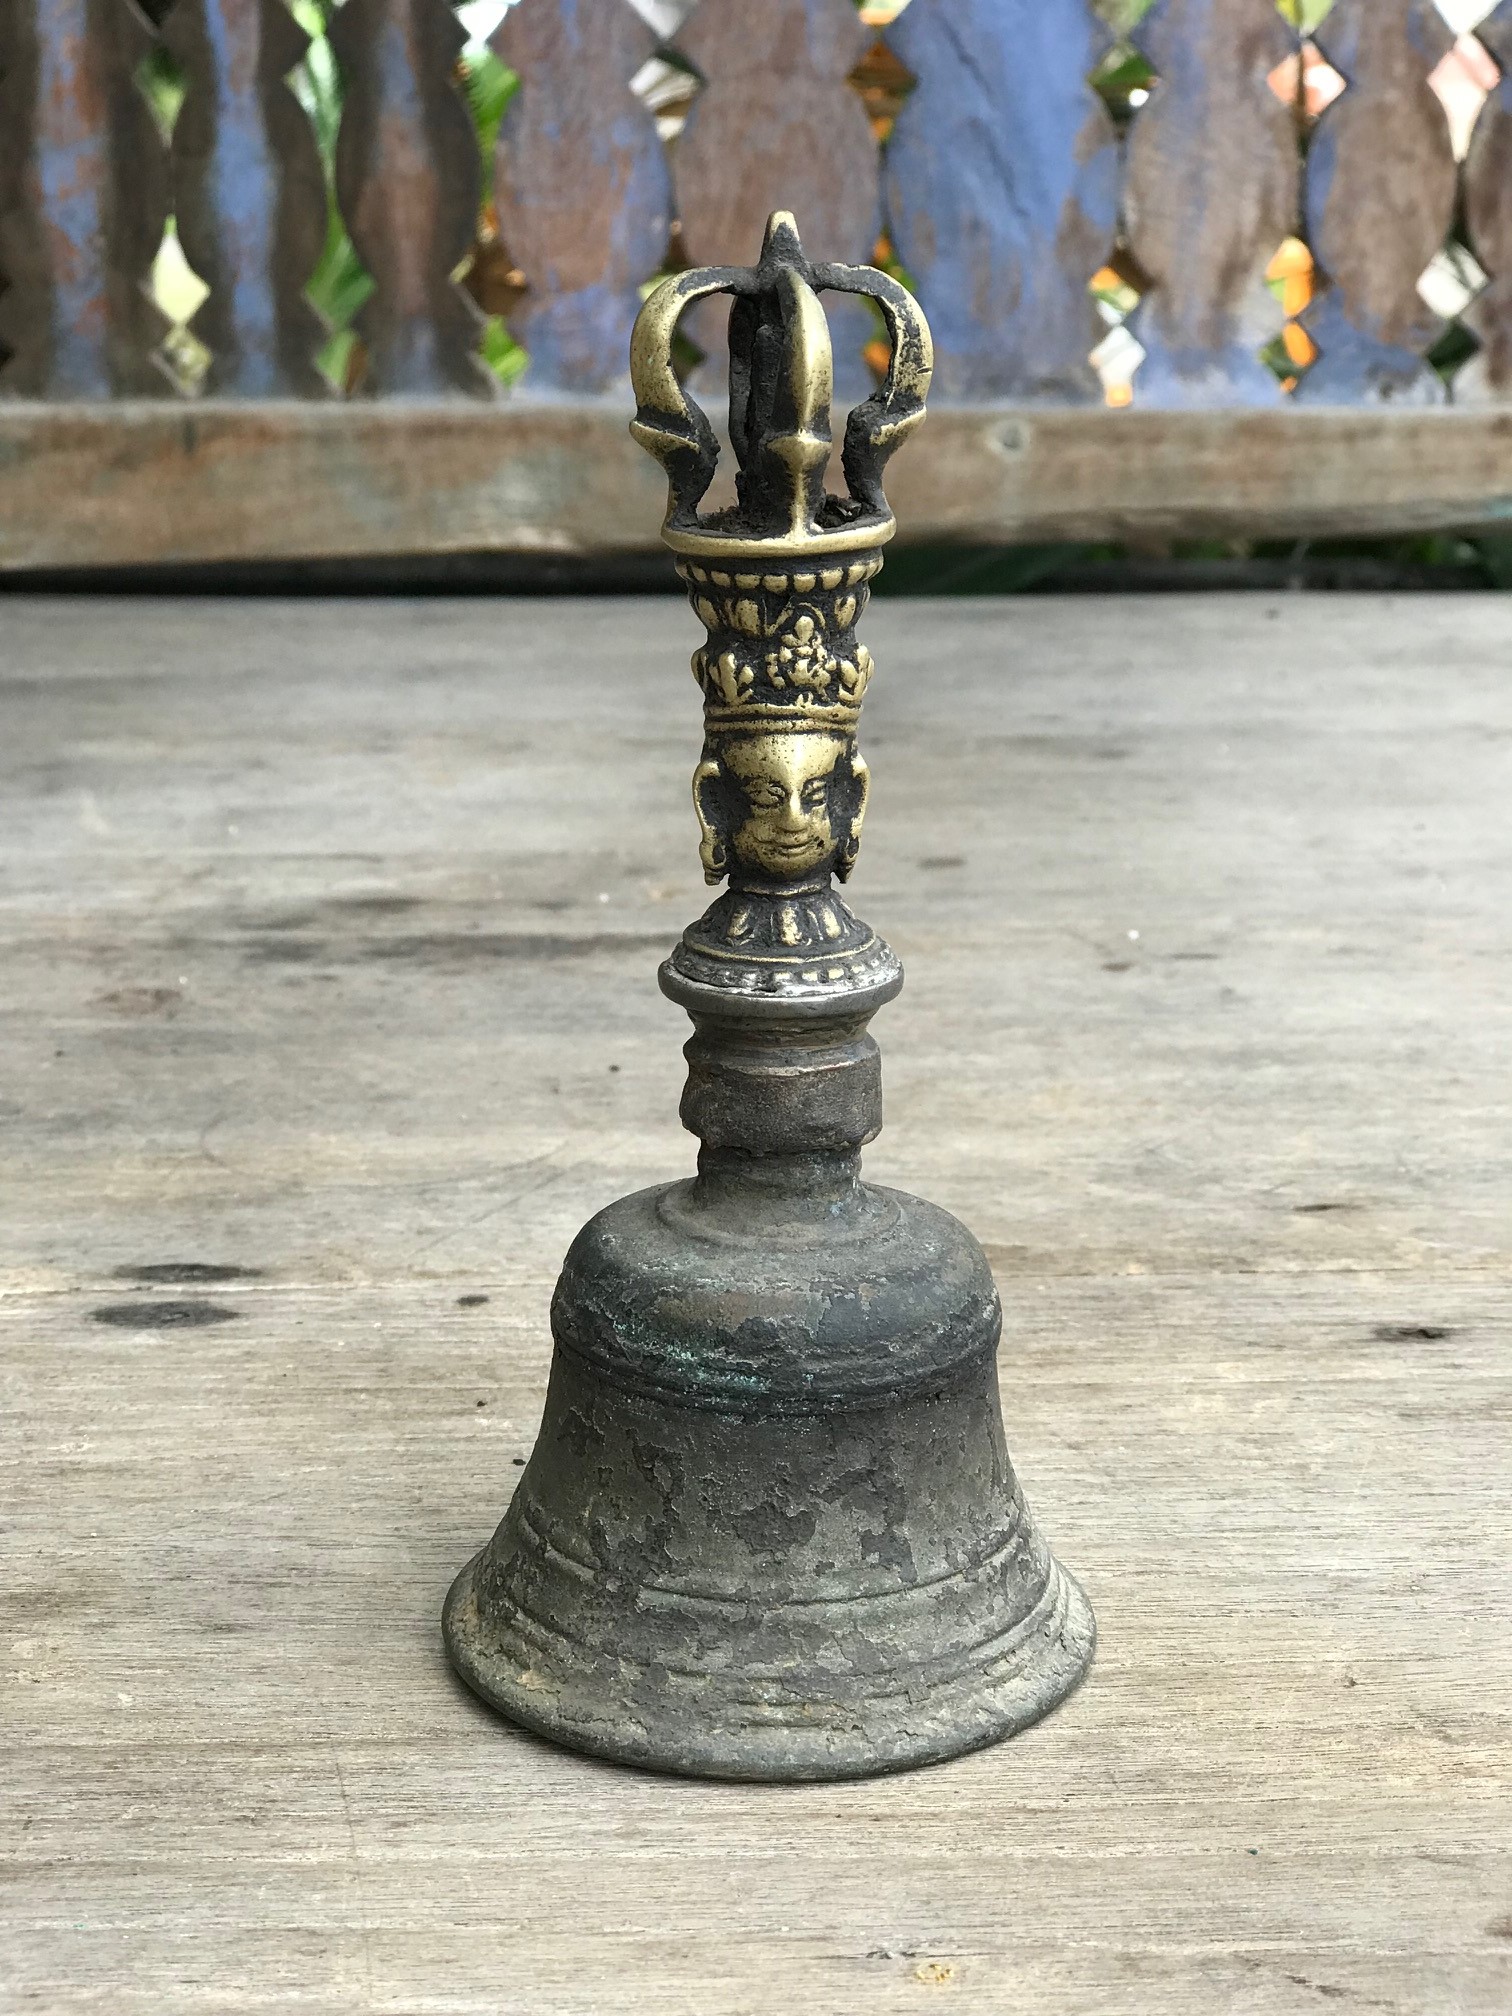 Musical Instrument, temple clapper bell with face, Nepal, 150 years old, bronze, The Bell, representing the female aspect, stands for wisdom. It is held in the left hand. If the Dorje (crown motif on top) is separate, it is held in the right hand. The are always used in combination in religious ceremonies. Together they represent enlightenment. 7 1/4" x 3 1/4", $1300. thedavidalancollection.com , solana beach, ca